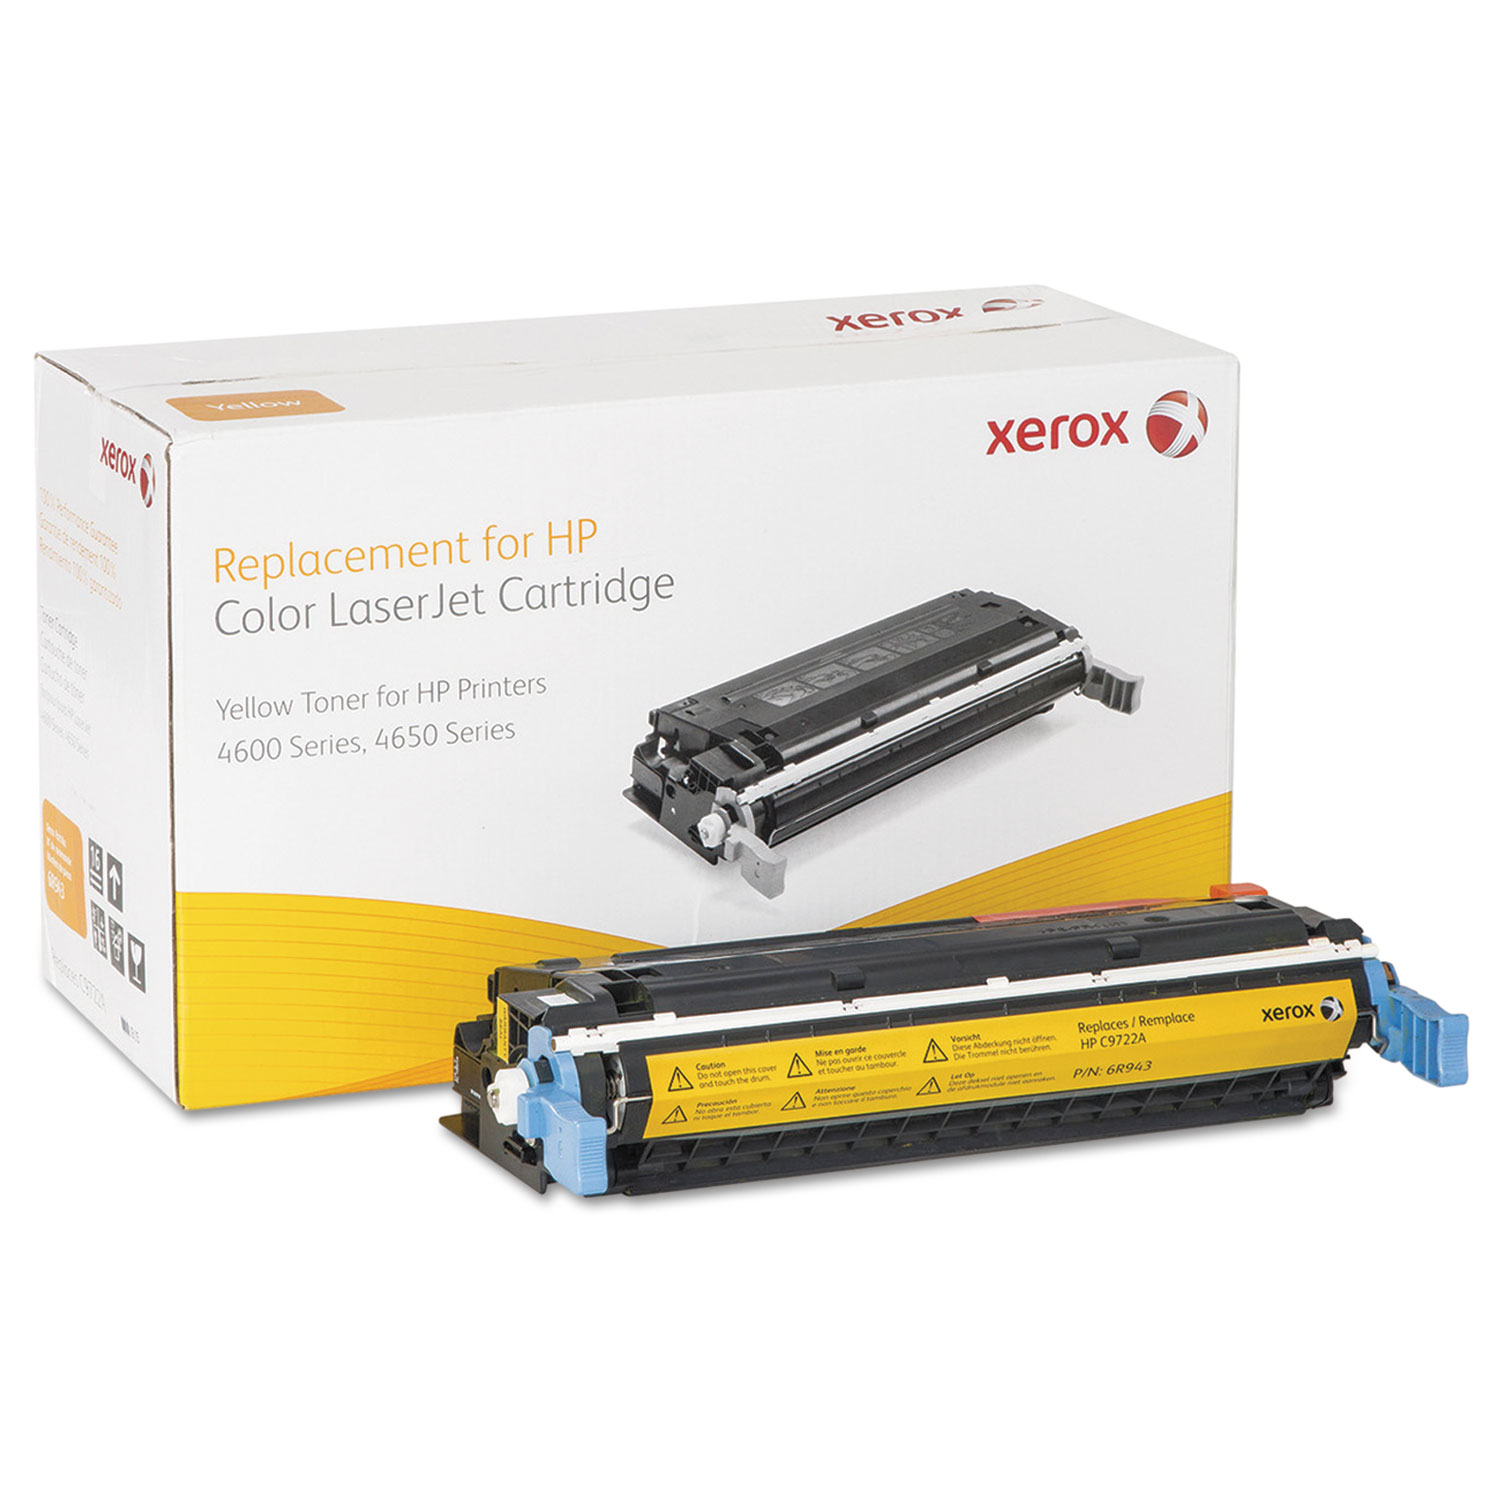  Xerox 006R00943 006R00943 Replacement Toner for C9722A (641A), Yellow (XER006R00943) 